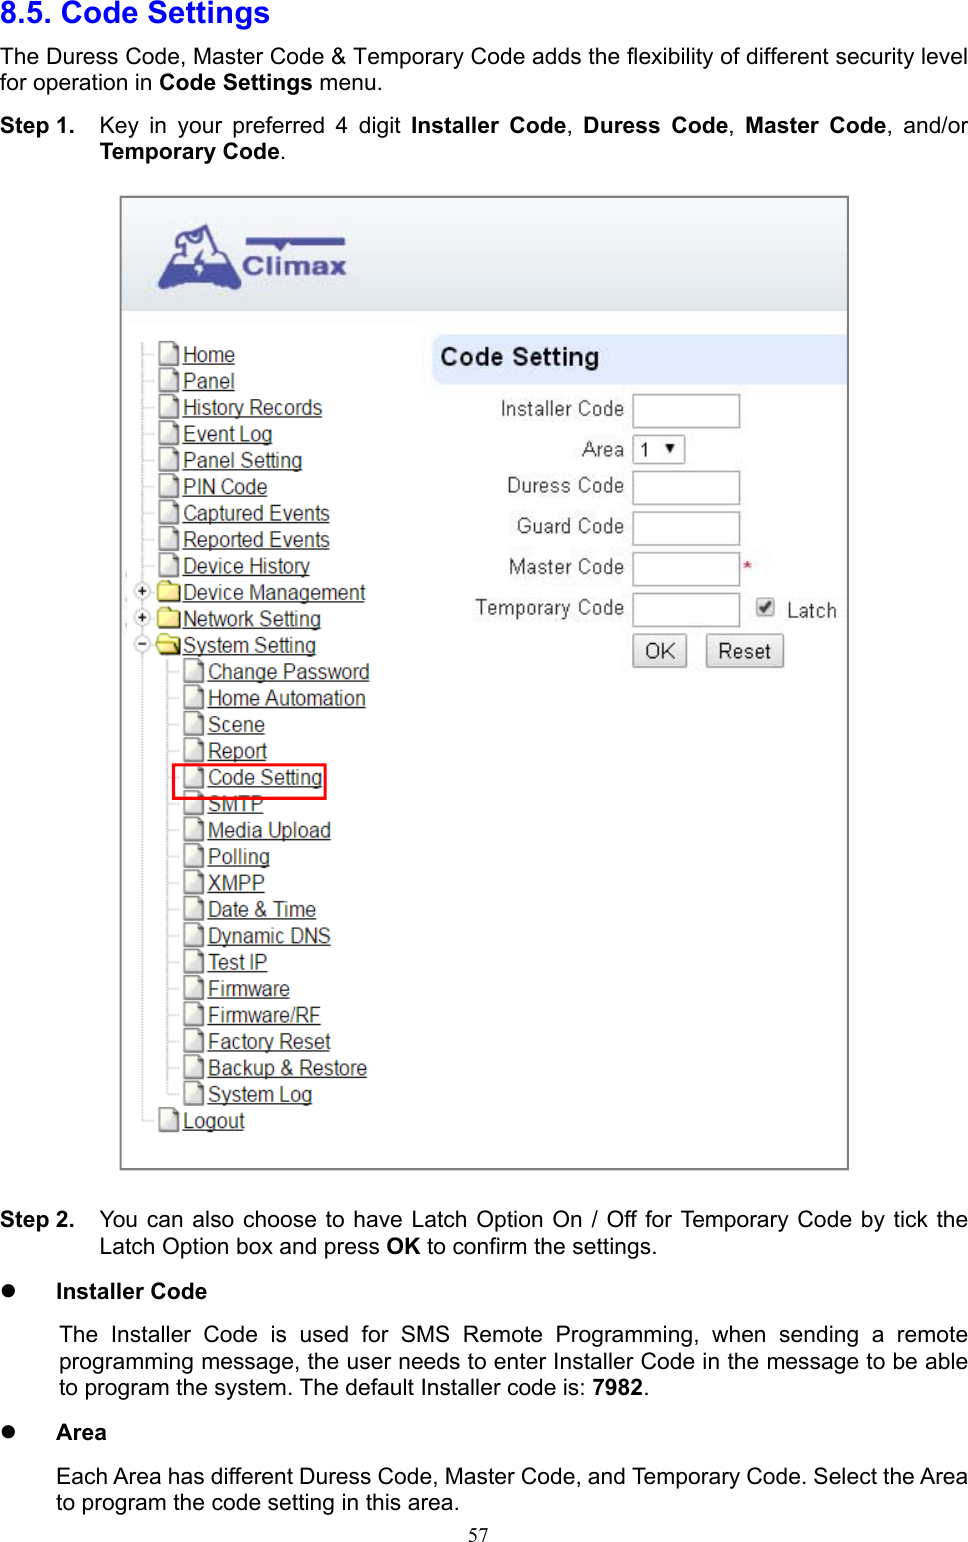  578.5. Code Settings   The Duress Code, Master Code &amp; Temporary Code adds the flexibility of different security level for operation in Code Settings menu. Step 1.  Key  in  your  preferred  4  digit  Installer  Code,  Duress  Code,  Master  Code,  and/or Temporary Code.  Step 2.  You can also choose to have Latch Option On / Off for Temporary Code by tick the Latch Option box and press OK to confirm the settings.    Installer Code The  Installer  Code  is  used  for  SMS  Remote  Programming,  when  sending  a  remote programming message, the user needs to enter Installer Code in the message to be able to program the system. The default Installer code is: 7982.  Area Each Area has different Duress Code, Master Code, and Temporary Code. Select the Area to program the code setting in this area. 